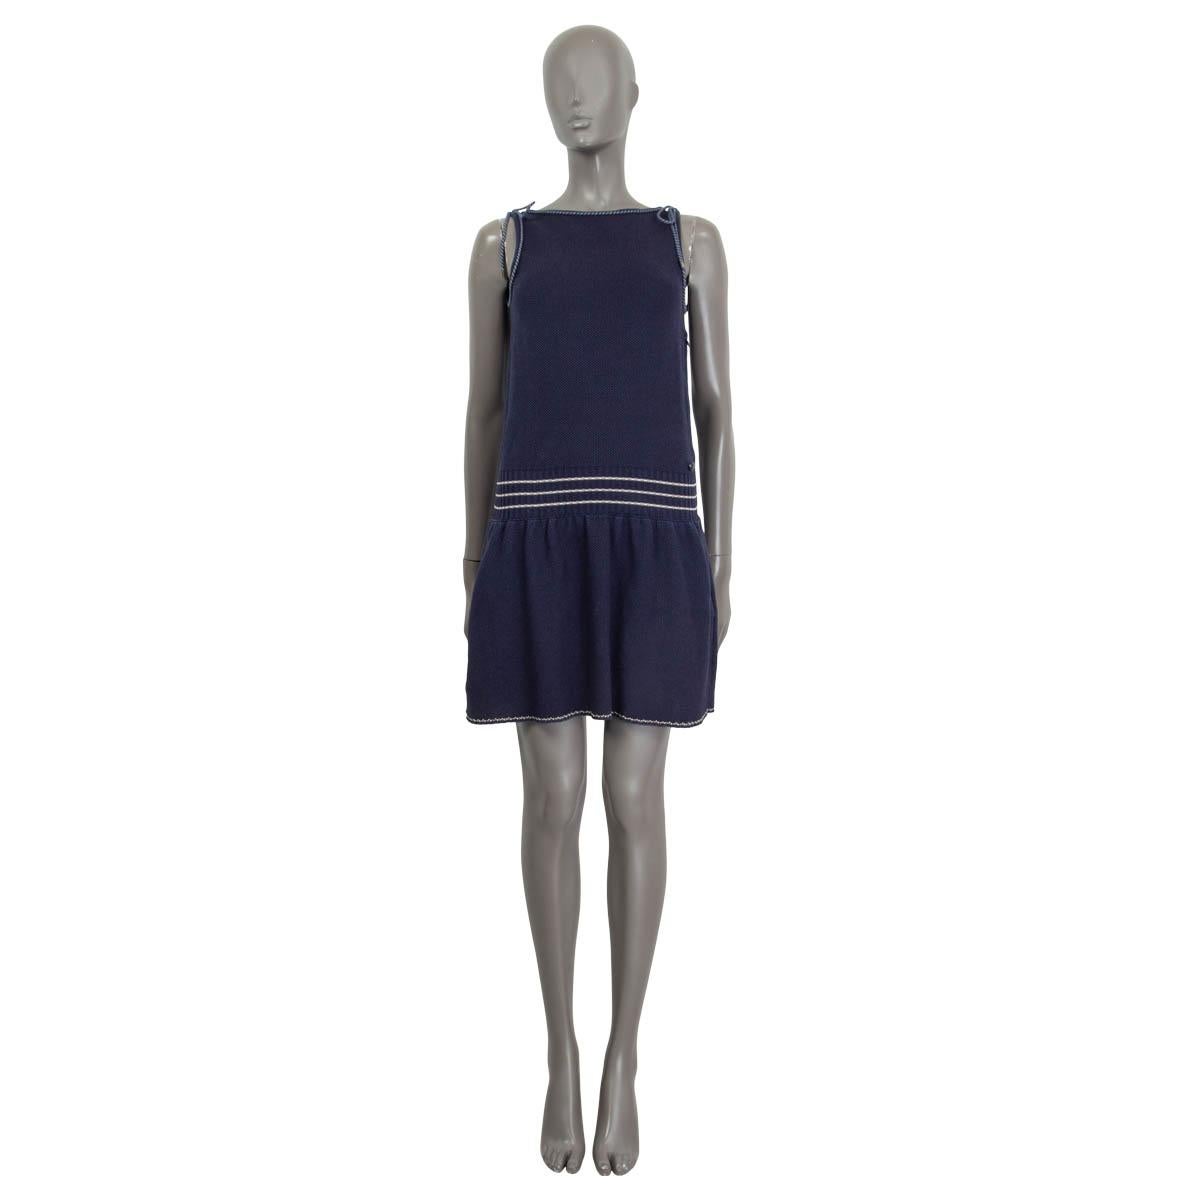 100% authentic Chanel 2015 drop waist knit dress in navy cotton (100%). Features a cord embellished trim, a 'CC' emblem at the front and a two slit pockets at the sides. Opens with a concealed zipper at the side. Unlined. Has been worn and is in